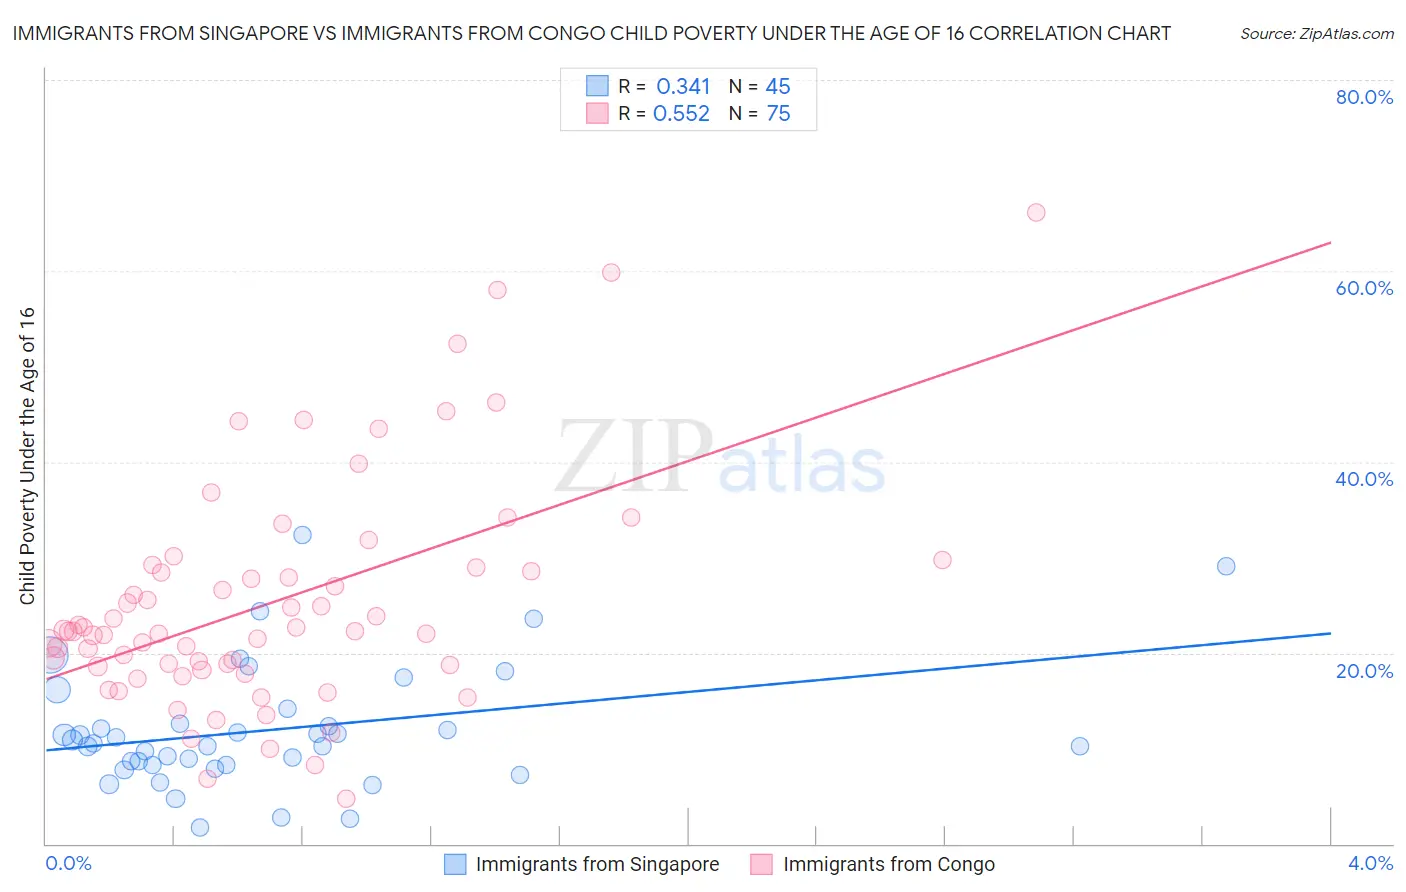 Immigrants from Singapore vs Immigrants from Congo Child Poverty Under the Age of 16